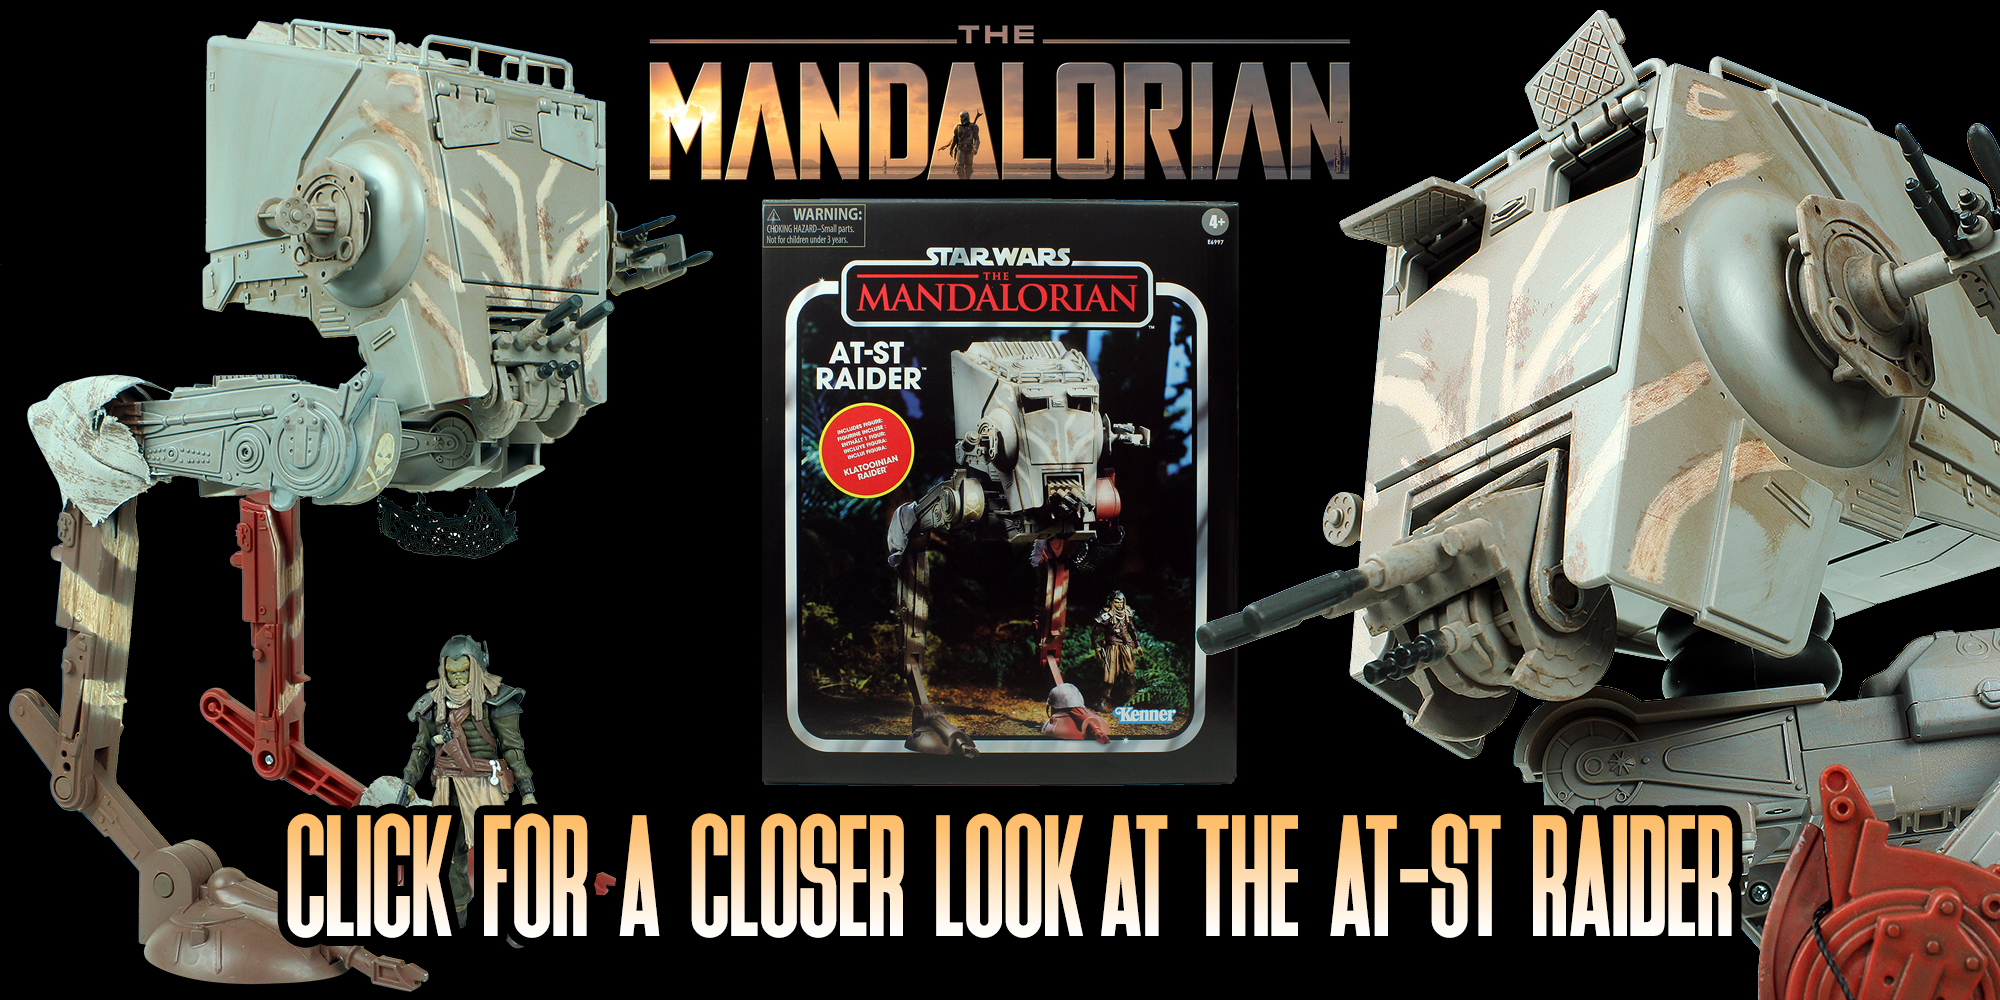 Join Us For A Look At The AT-ST RAIDER